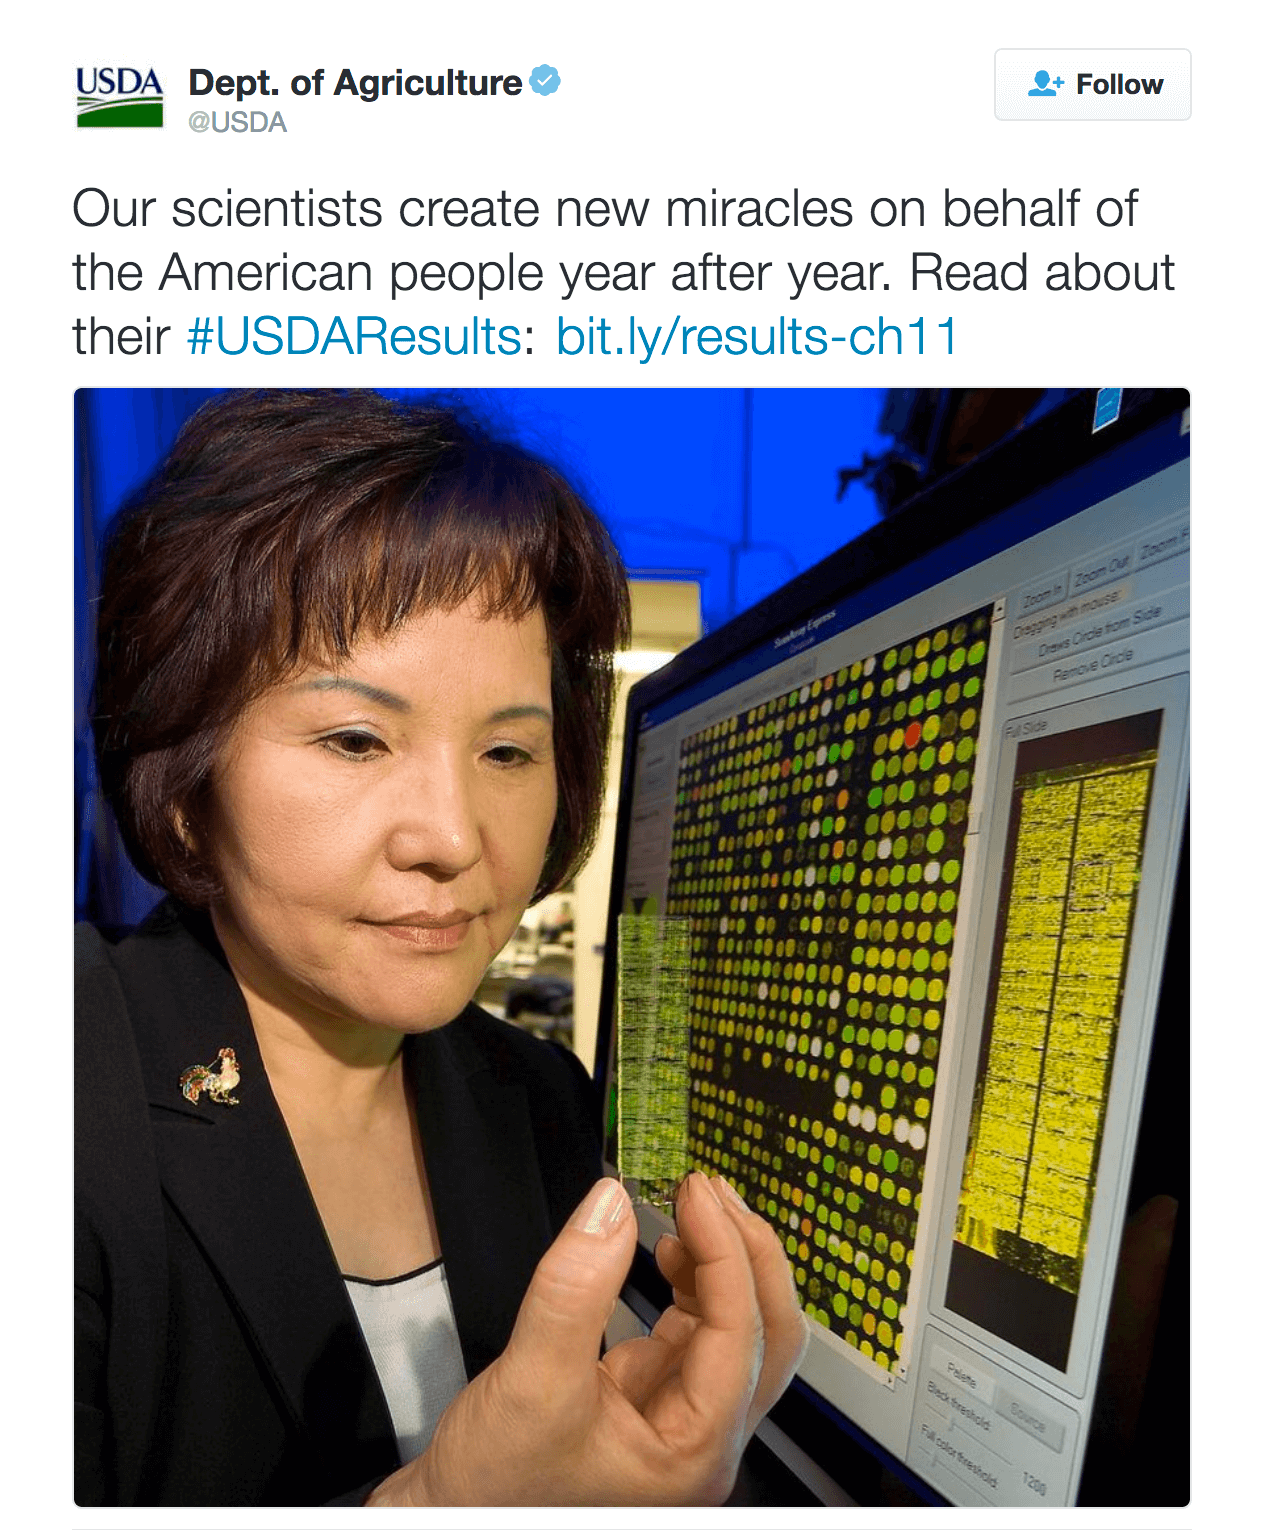 Our scientists create new miracles on behalf of the American people year after year. Read about their #USDAResults: http://bit.ly/results-ch11 